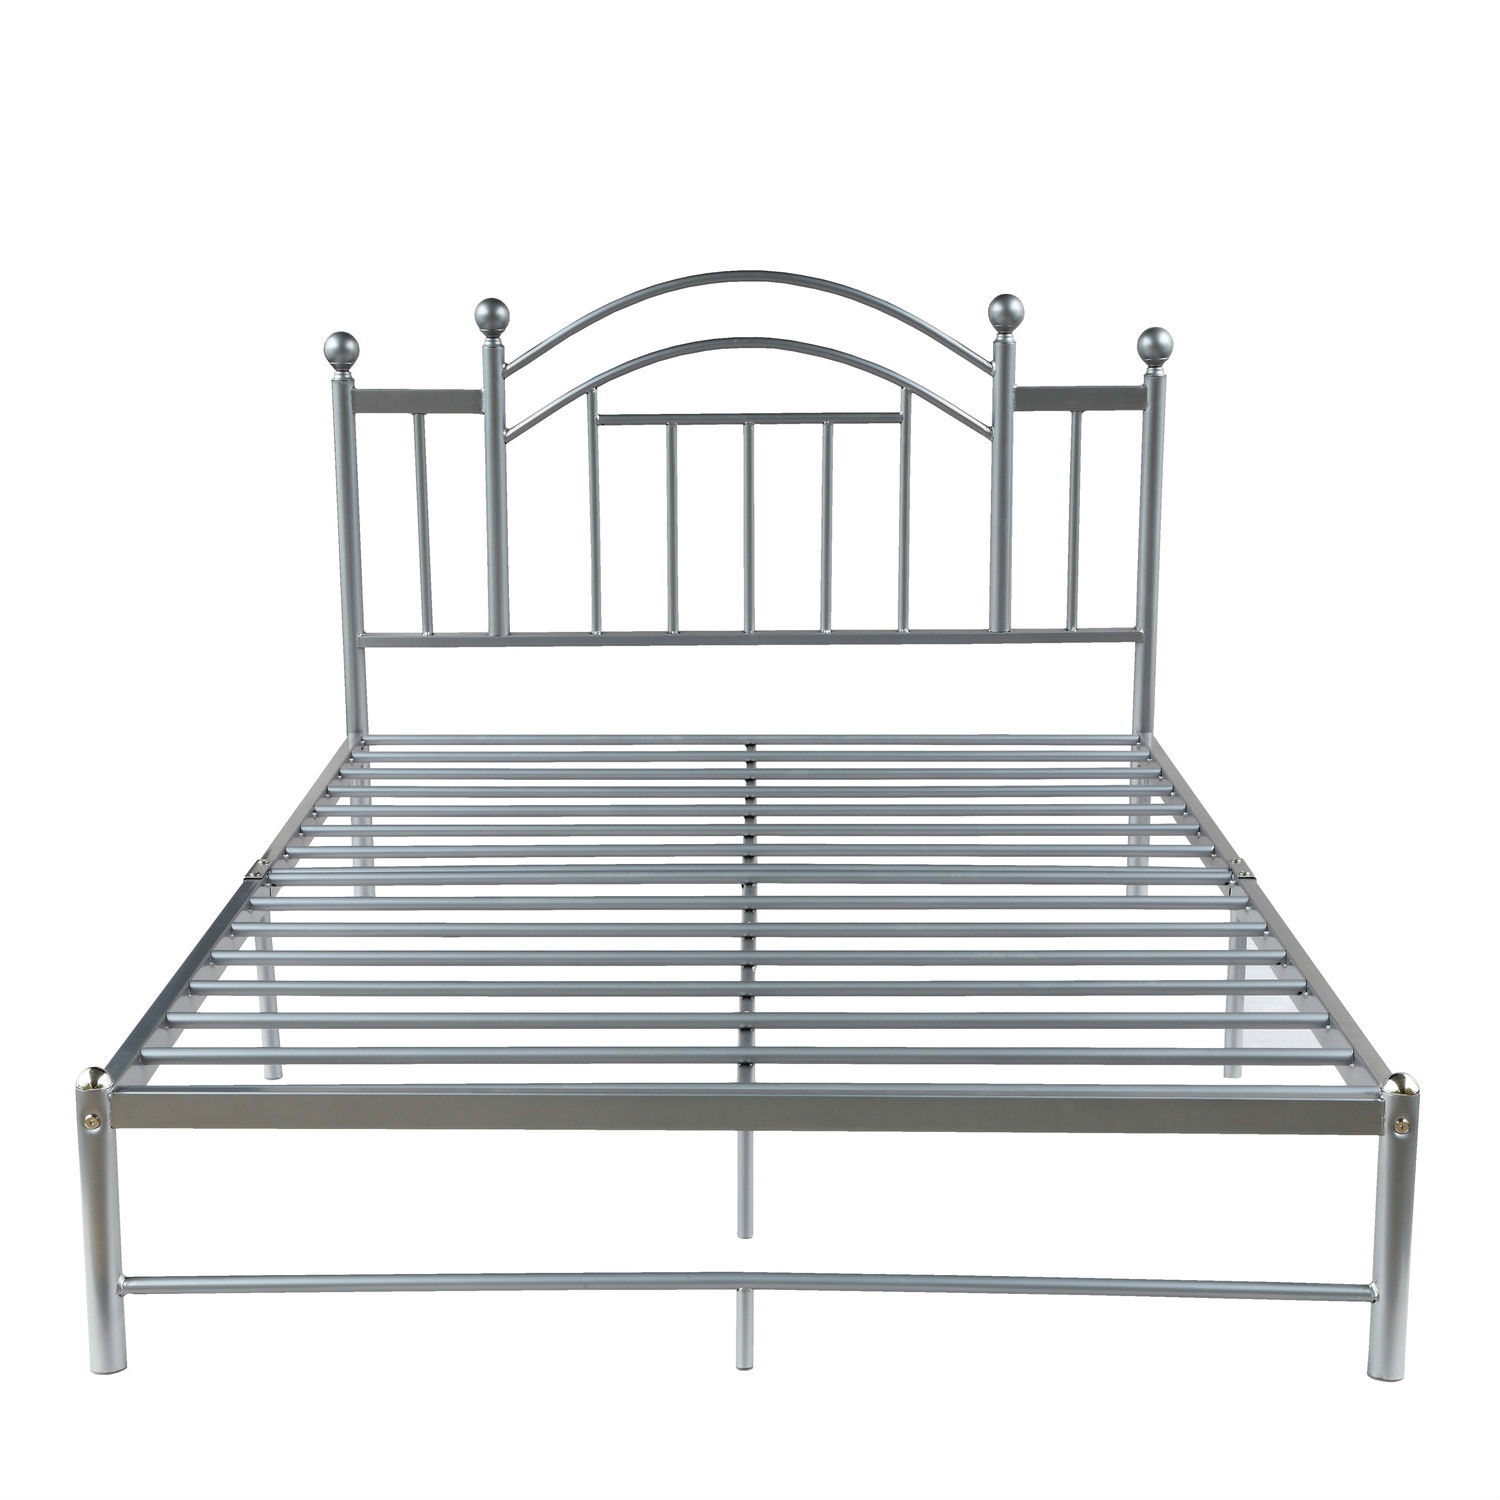 Greenhome123 Silver Gray Metal Platform, Twin Full Size Bed Frame